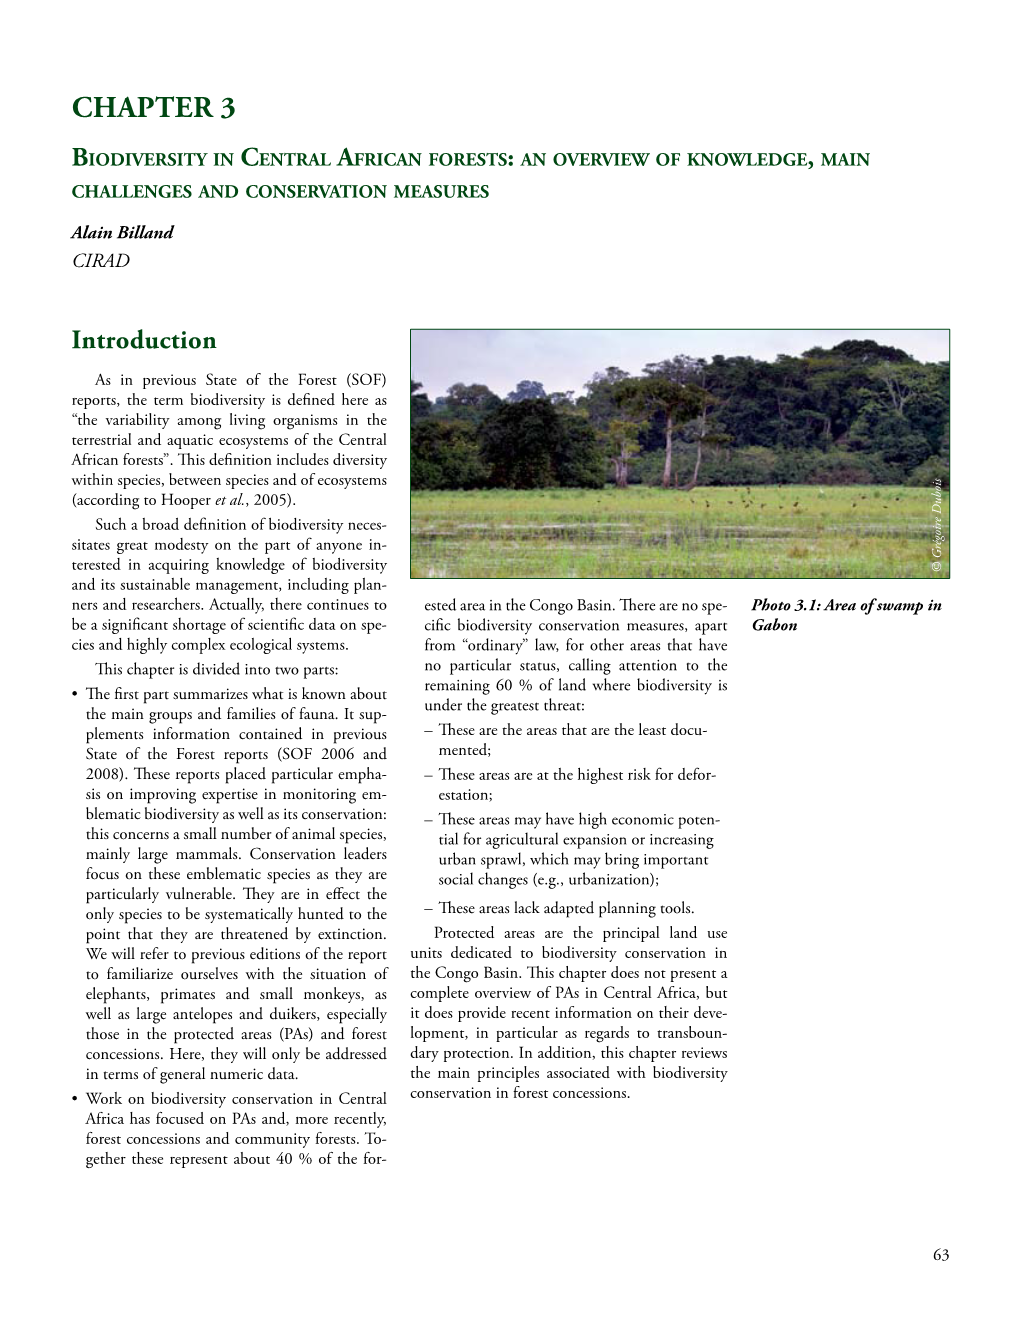 Biodiversity in Central African Forests: an Overview of Knowledge, Main Challenges and Conservation Measures